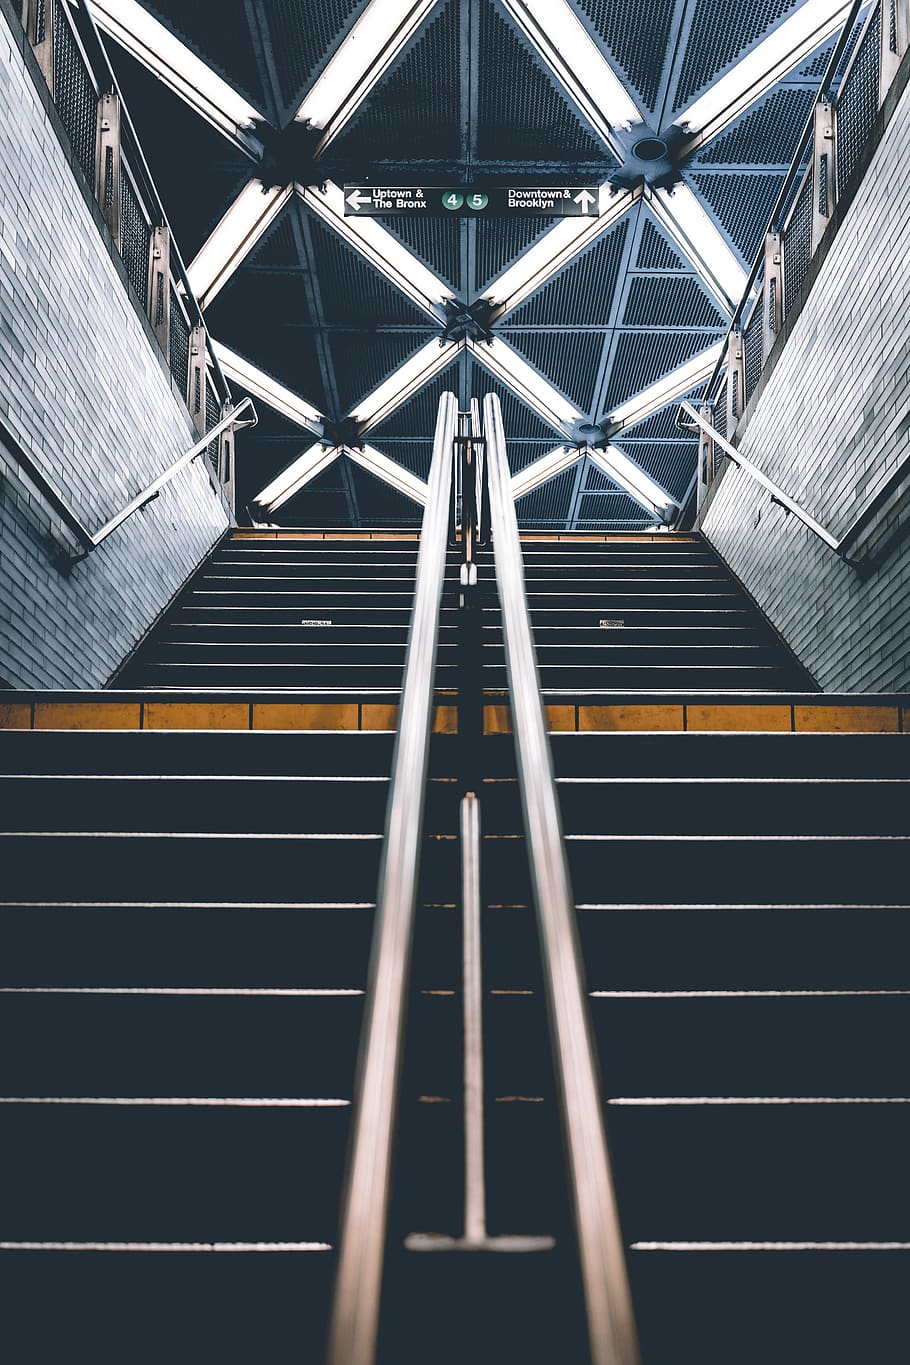 city, stairs, urban, concrete, design, architecture, wall, subway, metro, steps